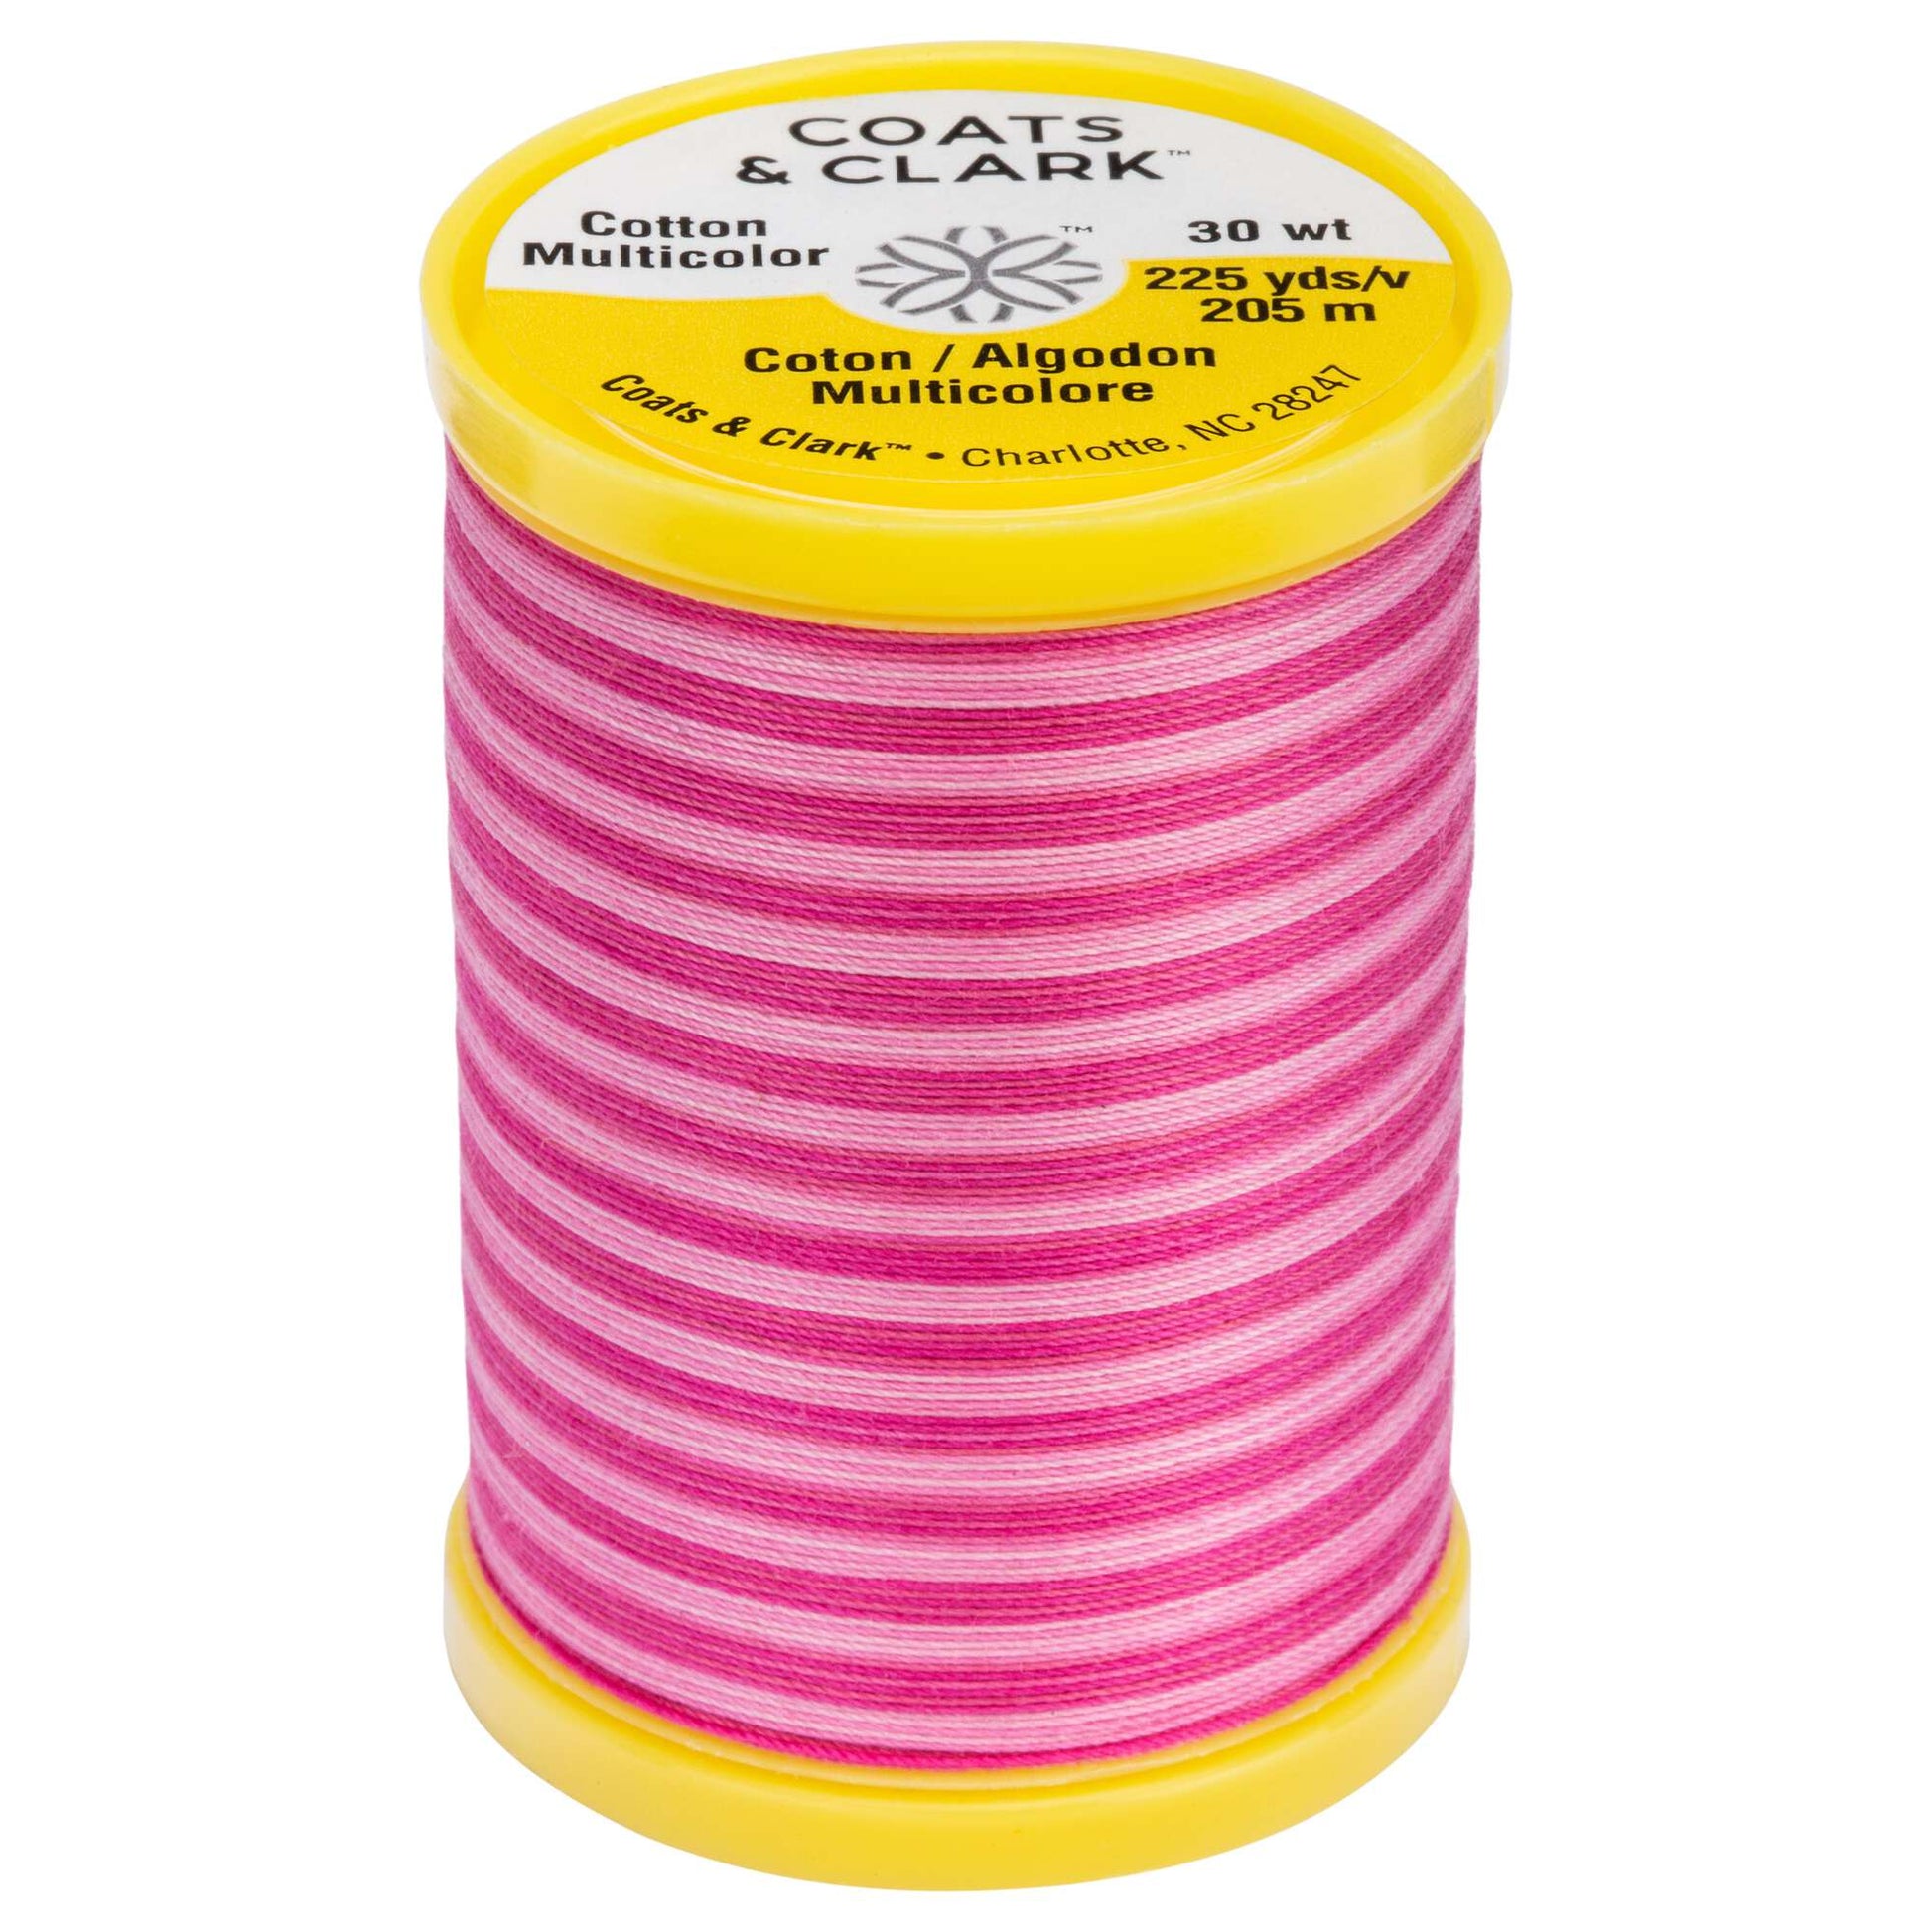 Coats & Clark Cotton Machine Quilting Multicolor Thread (225 Yards) Pink Passion